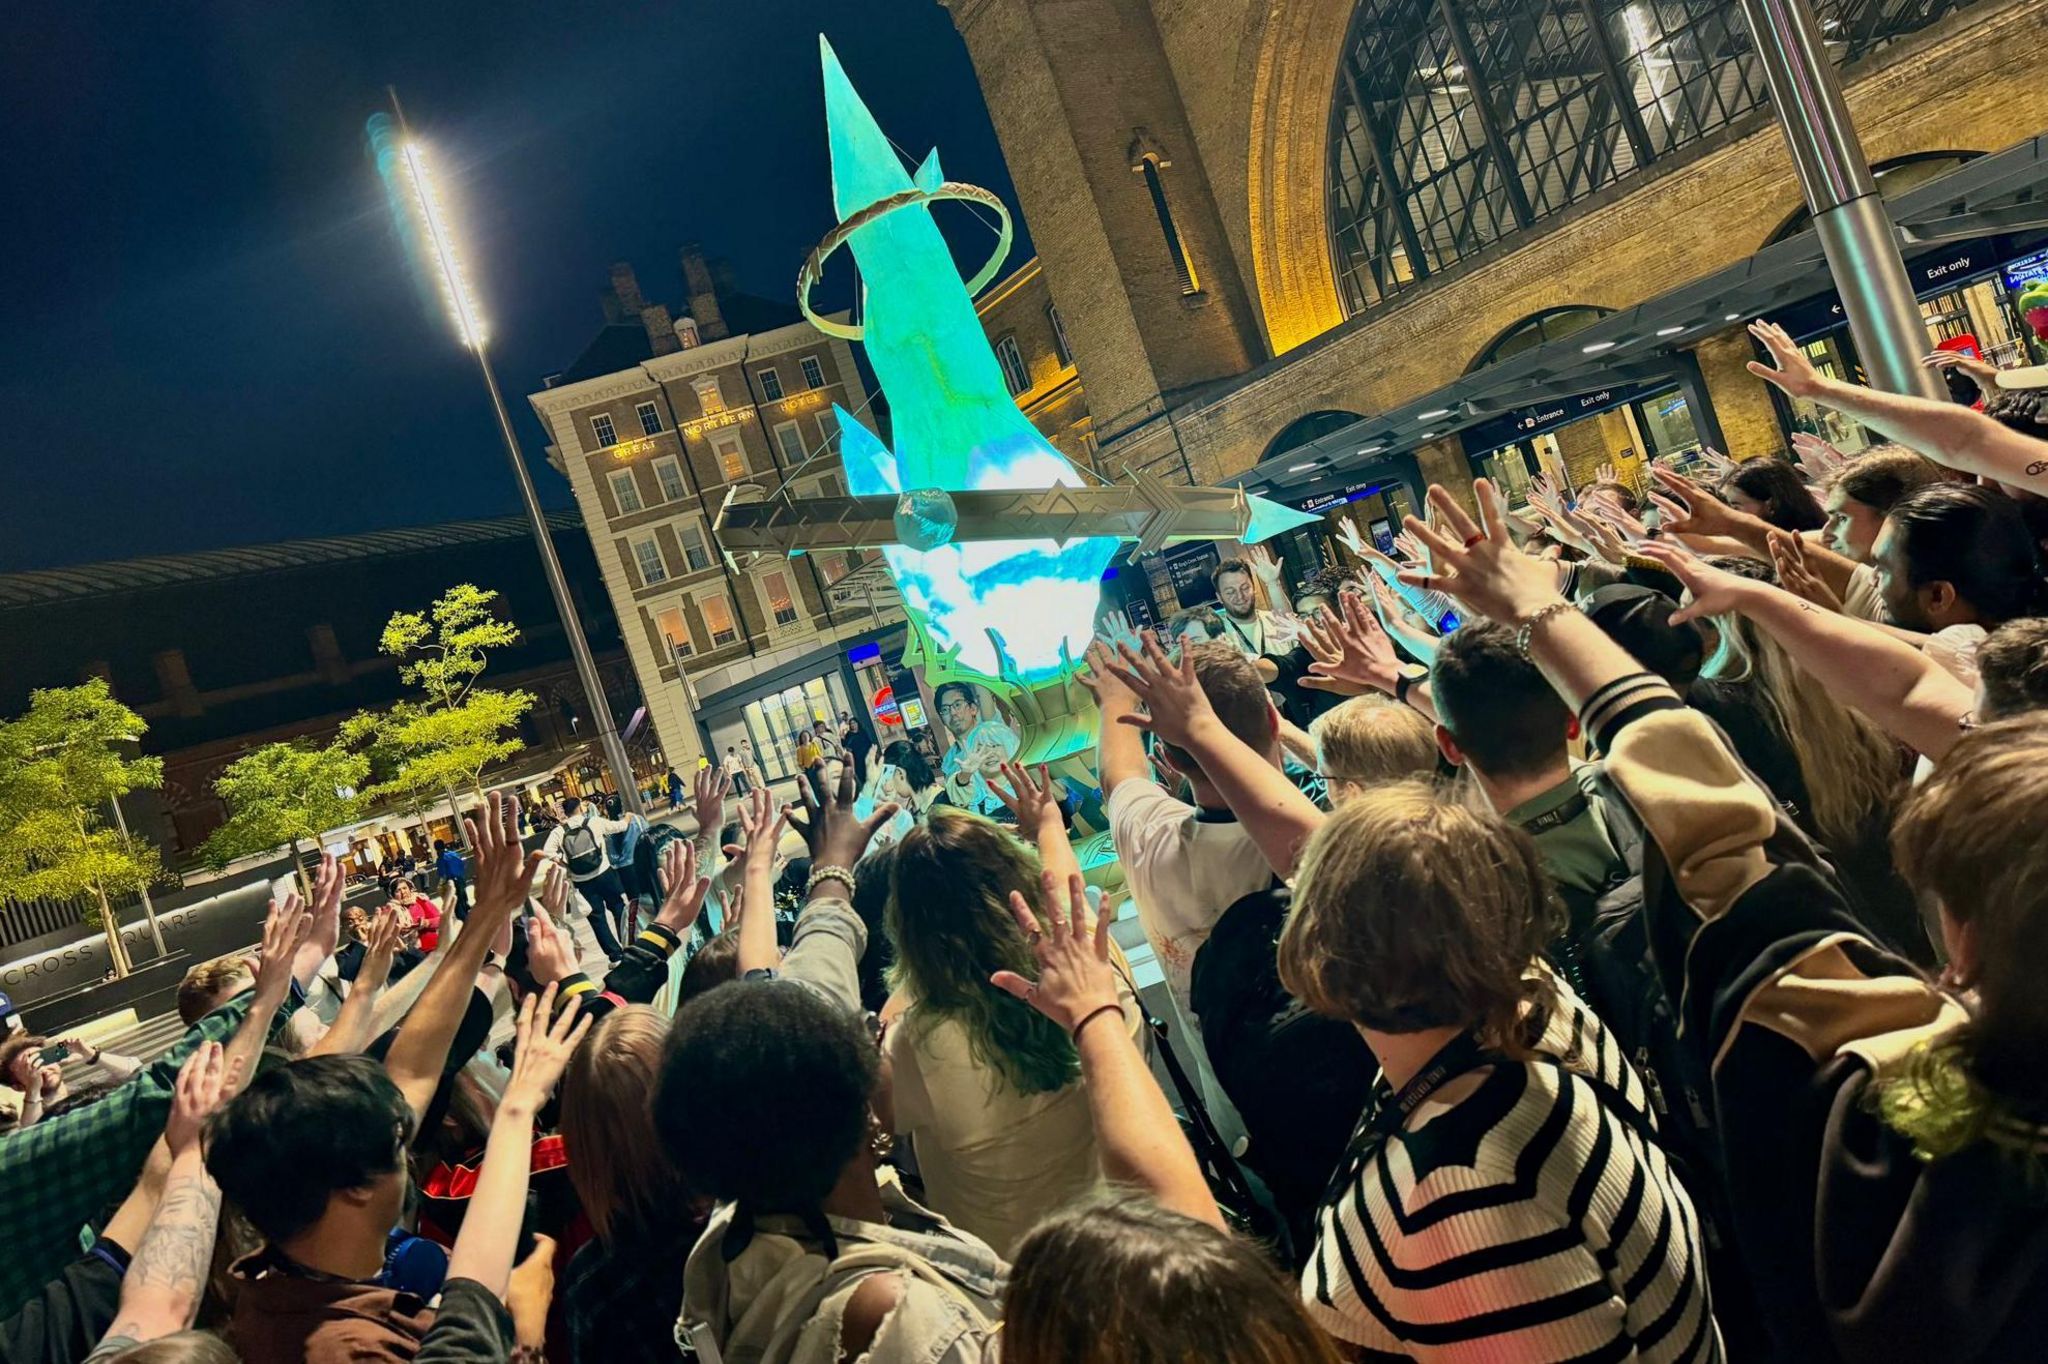 Dozens of people form a circle around a giant, glowing replica of a teal-coloured crystal. Everyone in the crowd has one arm outstretched towards the crystal, palm open and fingers splayed wide.